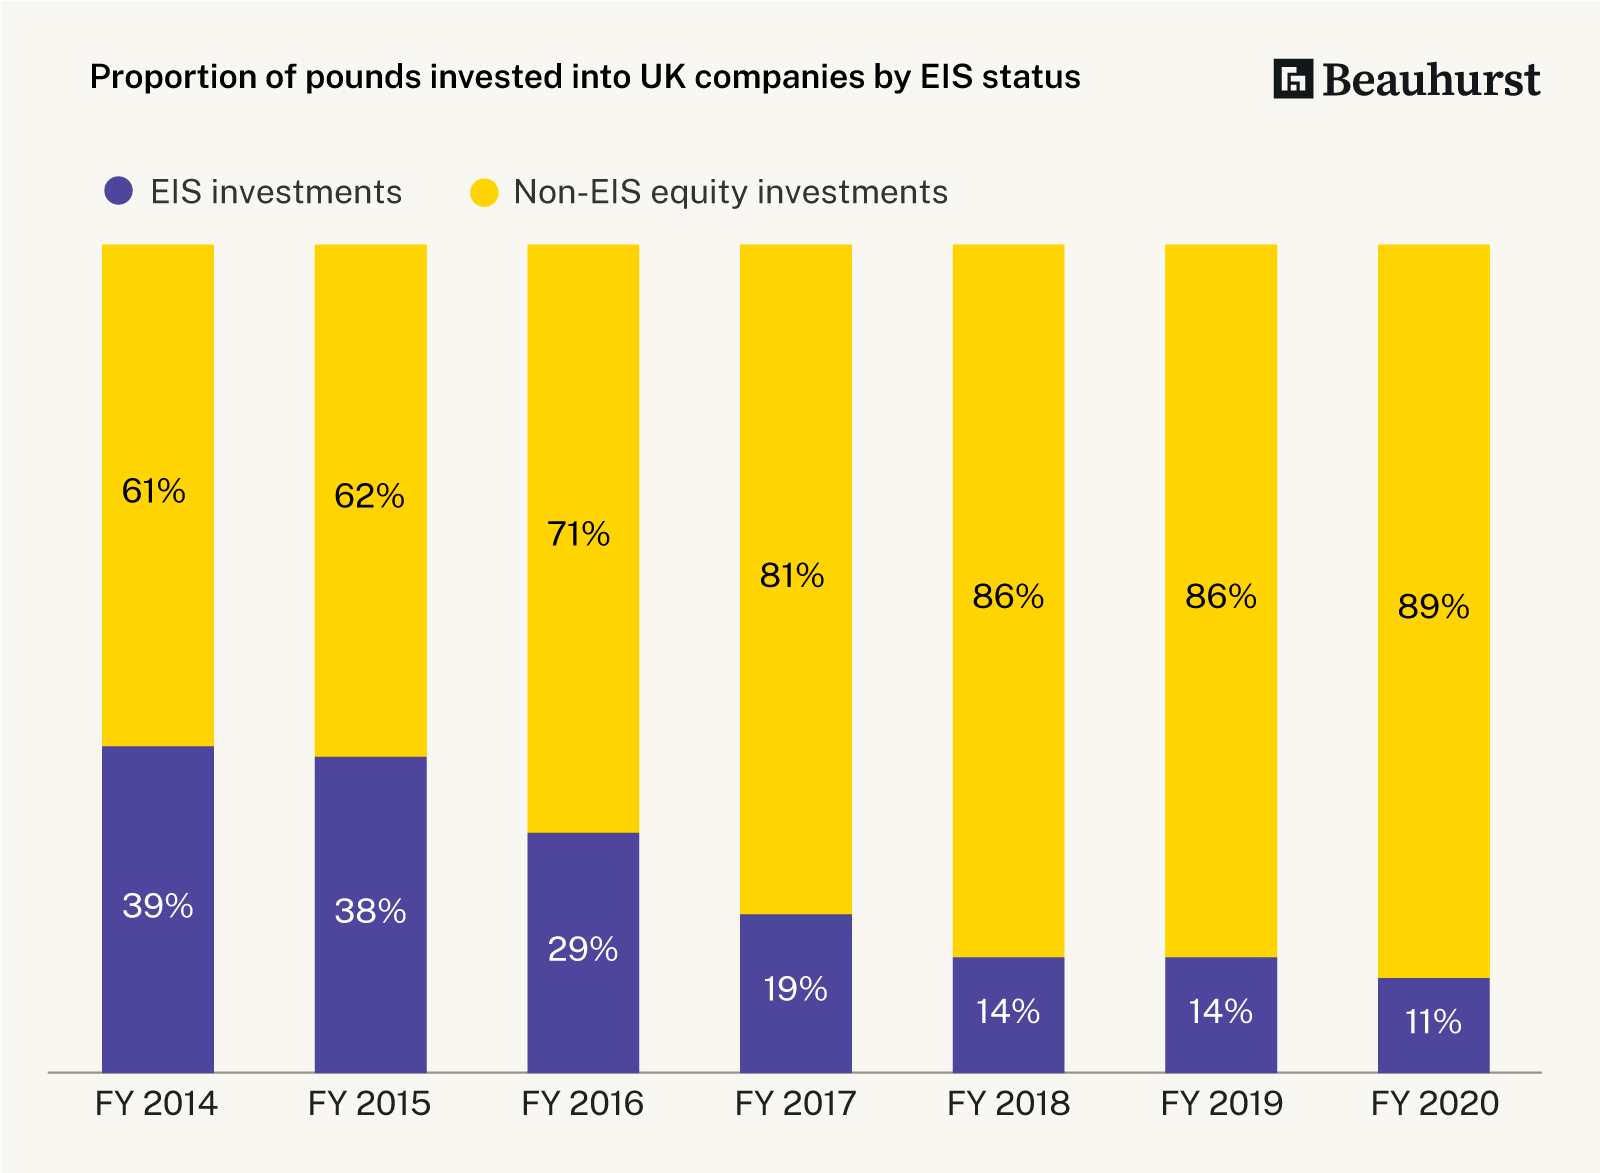 Value of investments by EIS status